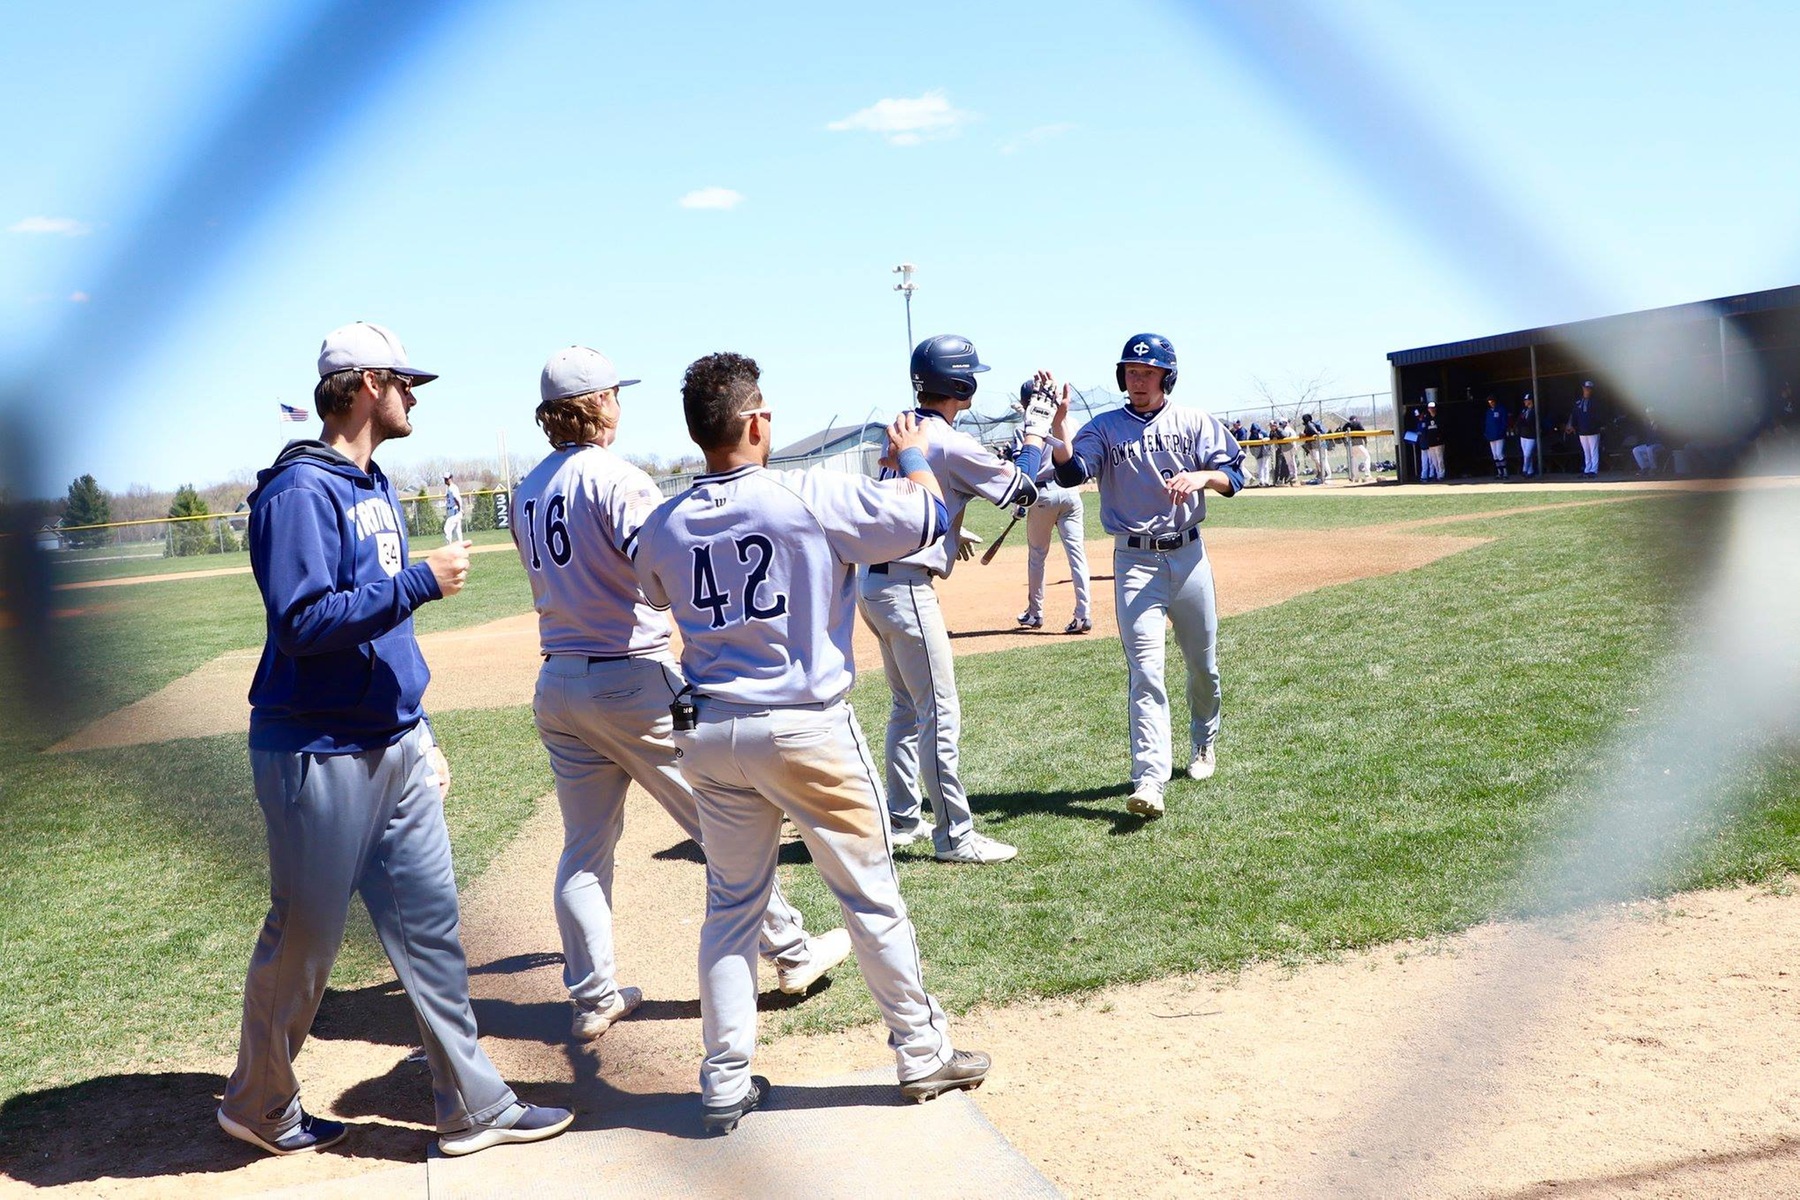 Tritons take two against defending champs